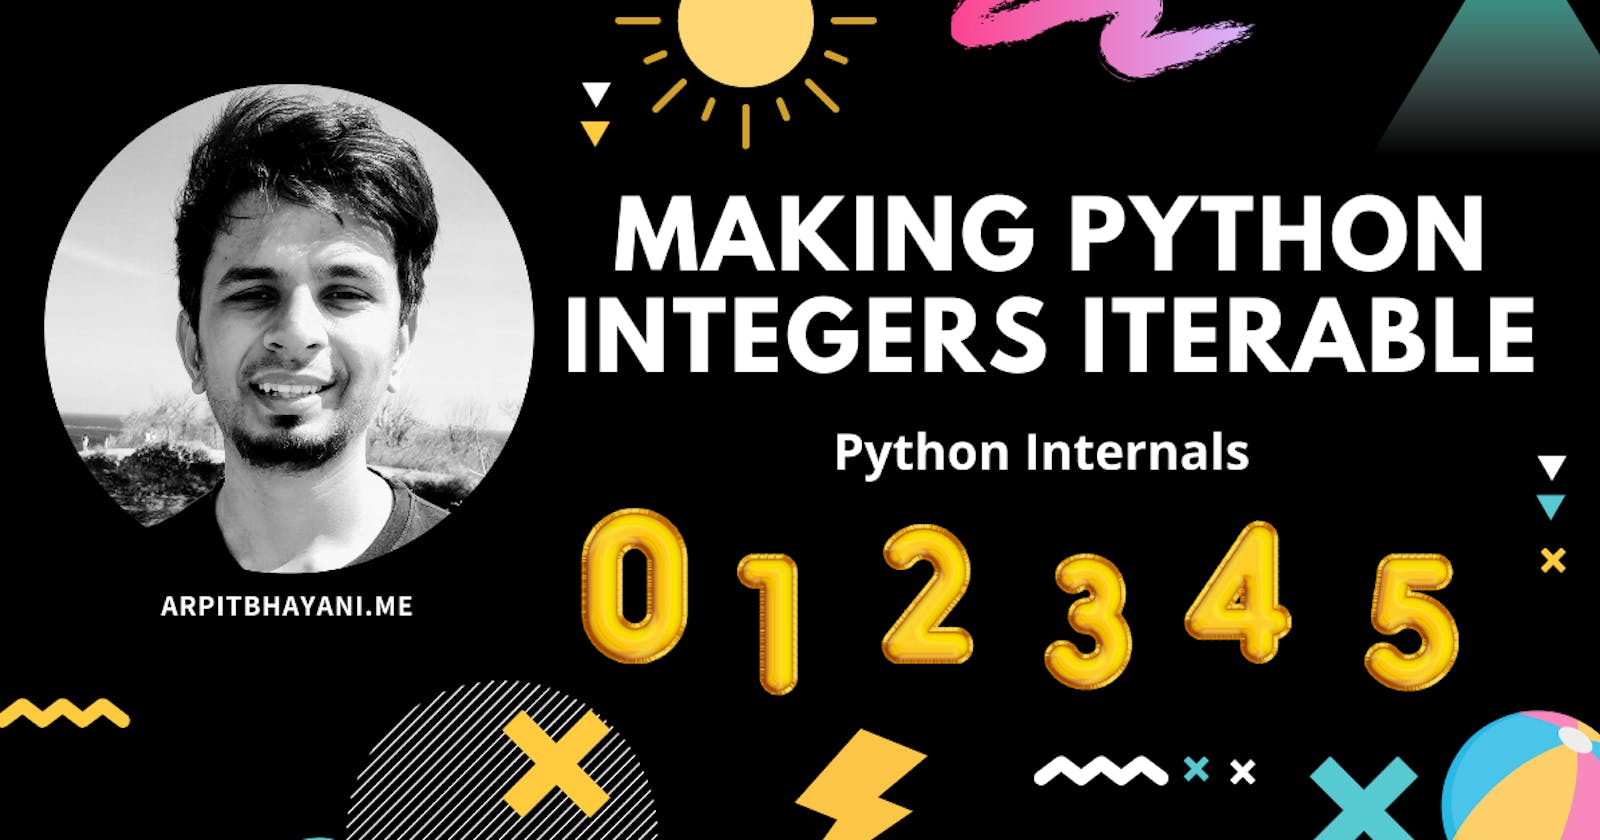 Making Python Integers Iterable